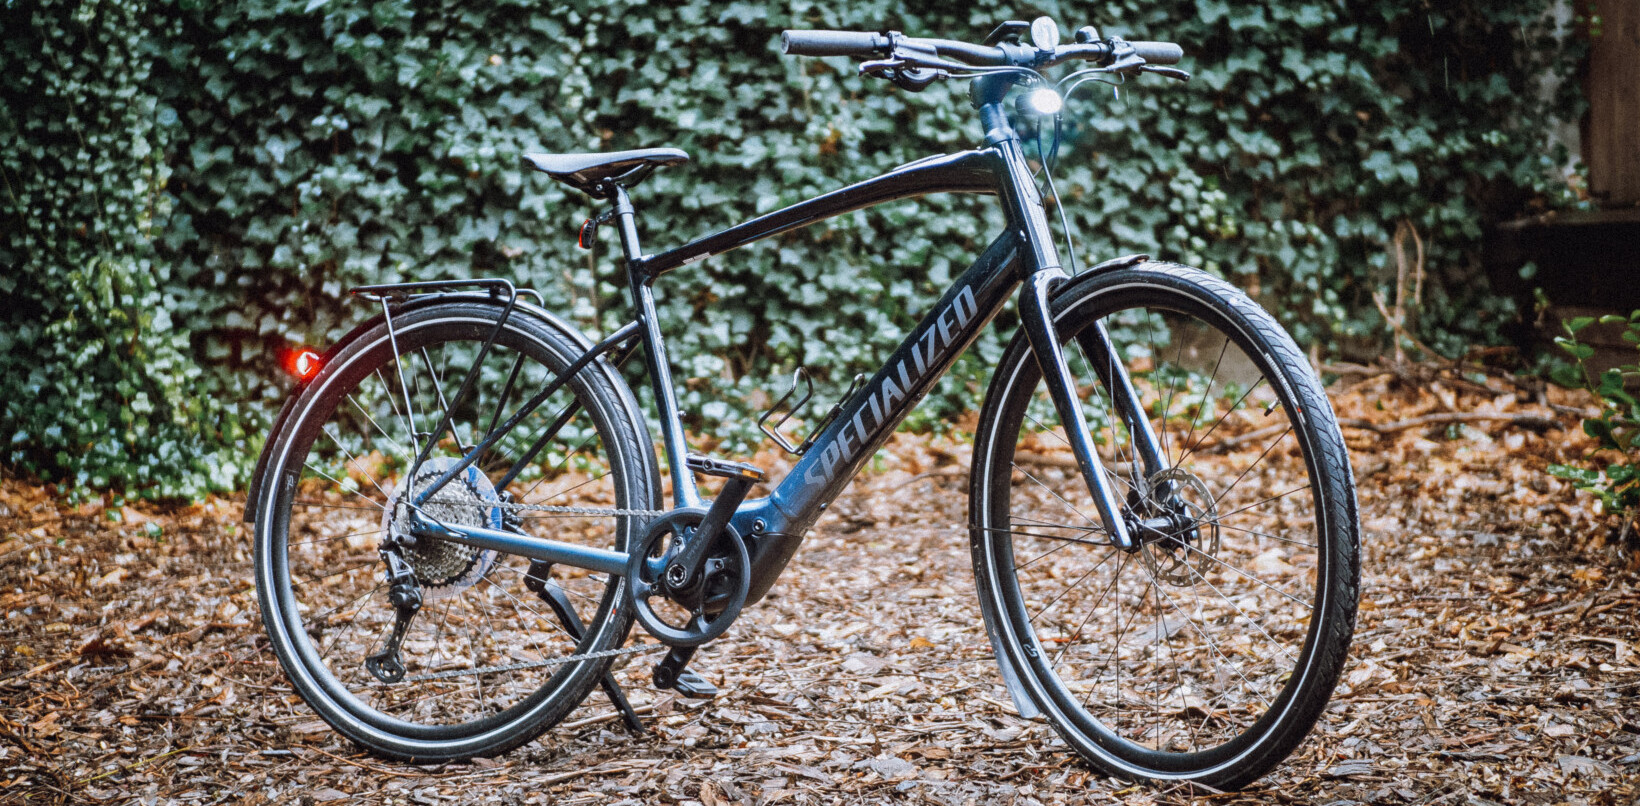 Review: Specialized’s Turbo Vado SL is so light, you’ll almost forget it’s an ebike